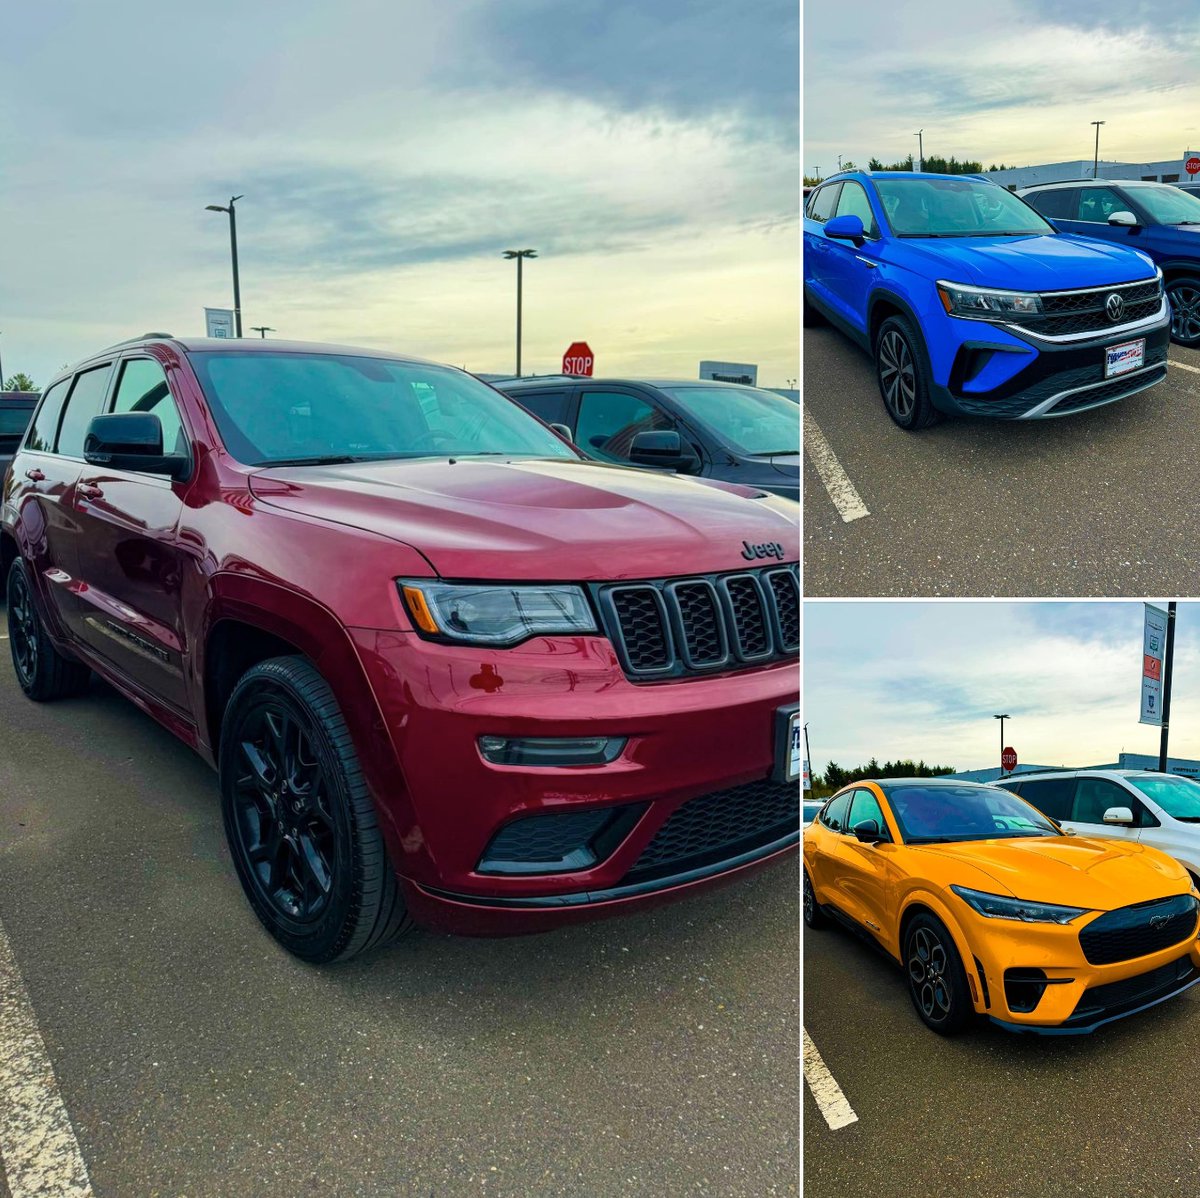 We have a HUGE selection of vehicles at our lot ✨ Whether you are looking for new or pre-owned, we have the perfect vehicle for all your automotive needs 🚘 Rain or shine our team is here to take great care of you! Come get behind the wheel 🤩 #Auto #Tvillecjdr